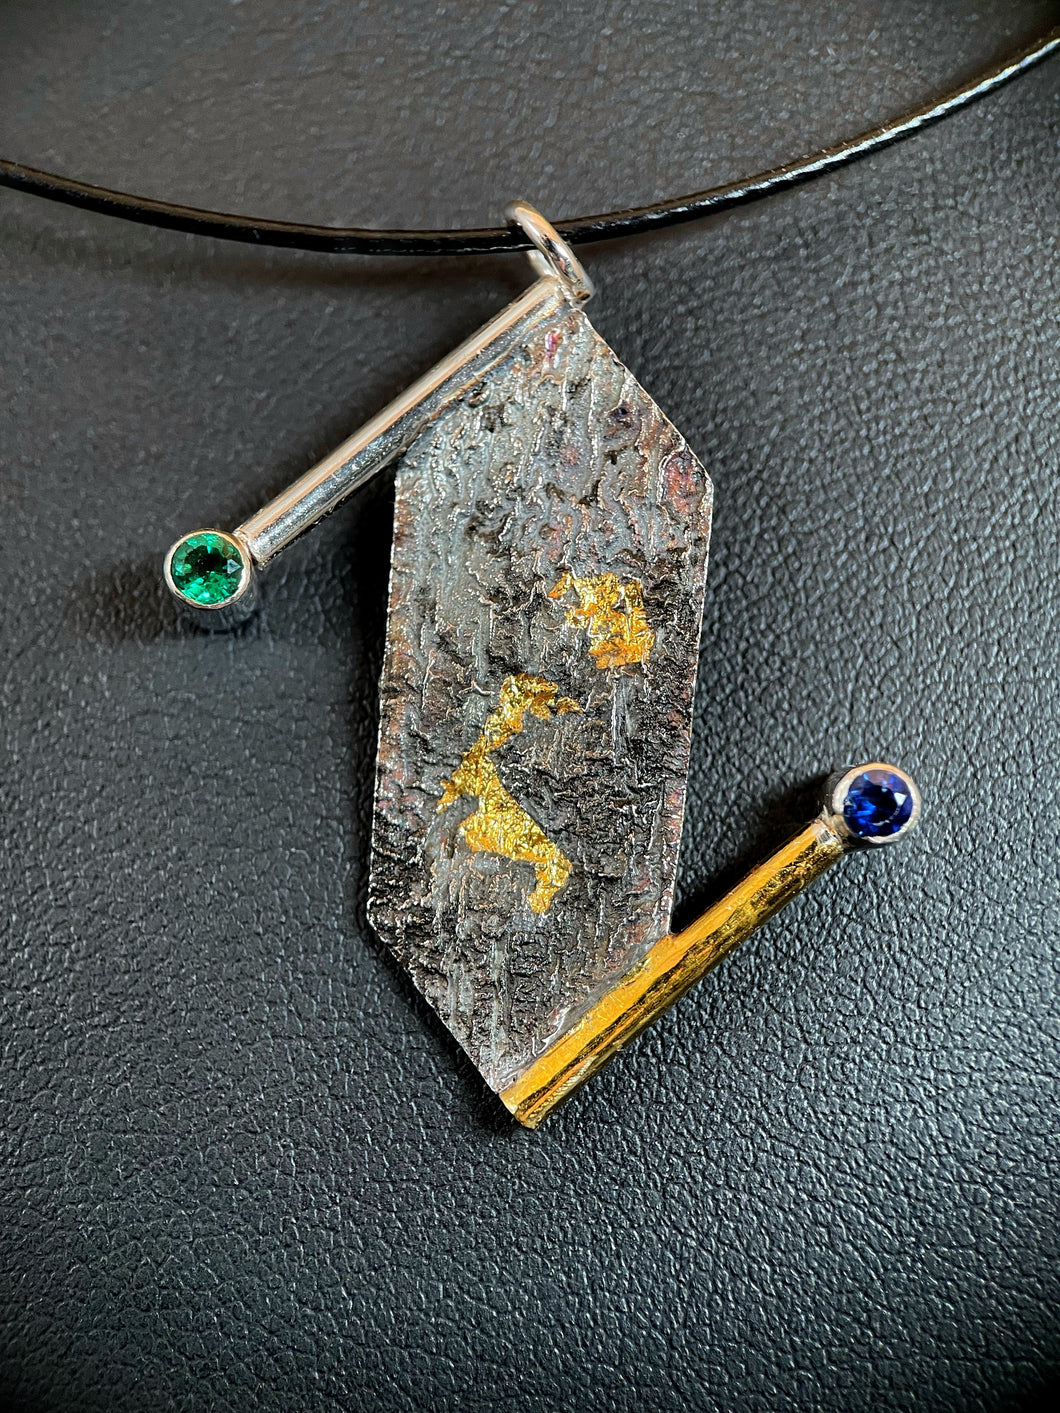 A silver necklace with a textured, terrain-like pattern. The body of the necklace is a vertically hanging rectangle with pointed ends. On the top left and bottom right edges are wires coming off of the point and continuing past the body of the necklace. The top wire is silver, the bottom gold. The top terminates in a lab-grown emerald, and the bottom in a lab-grown sapphire. There are two pockets of gold in the recessed portions of the texture.